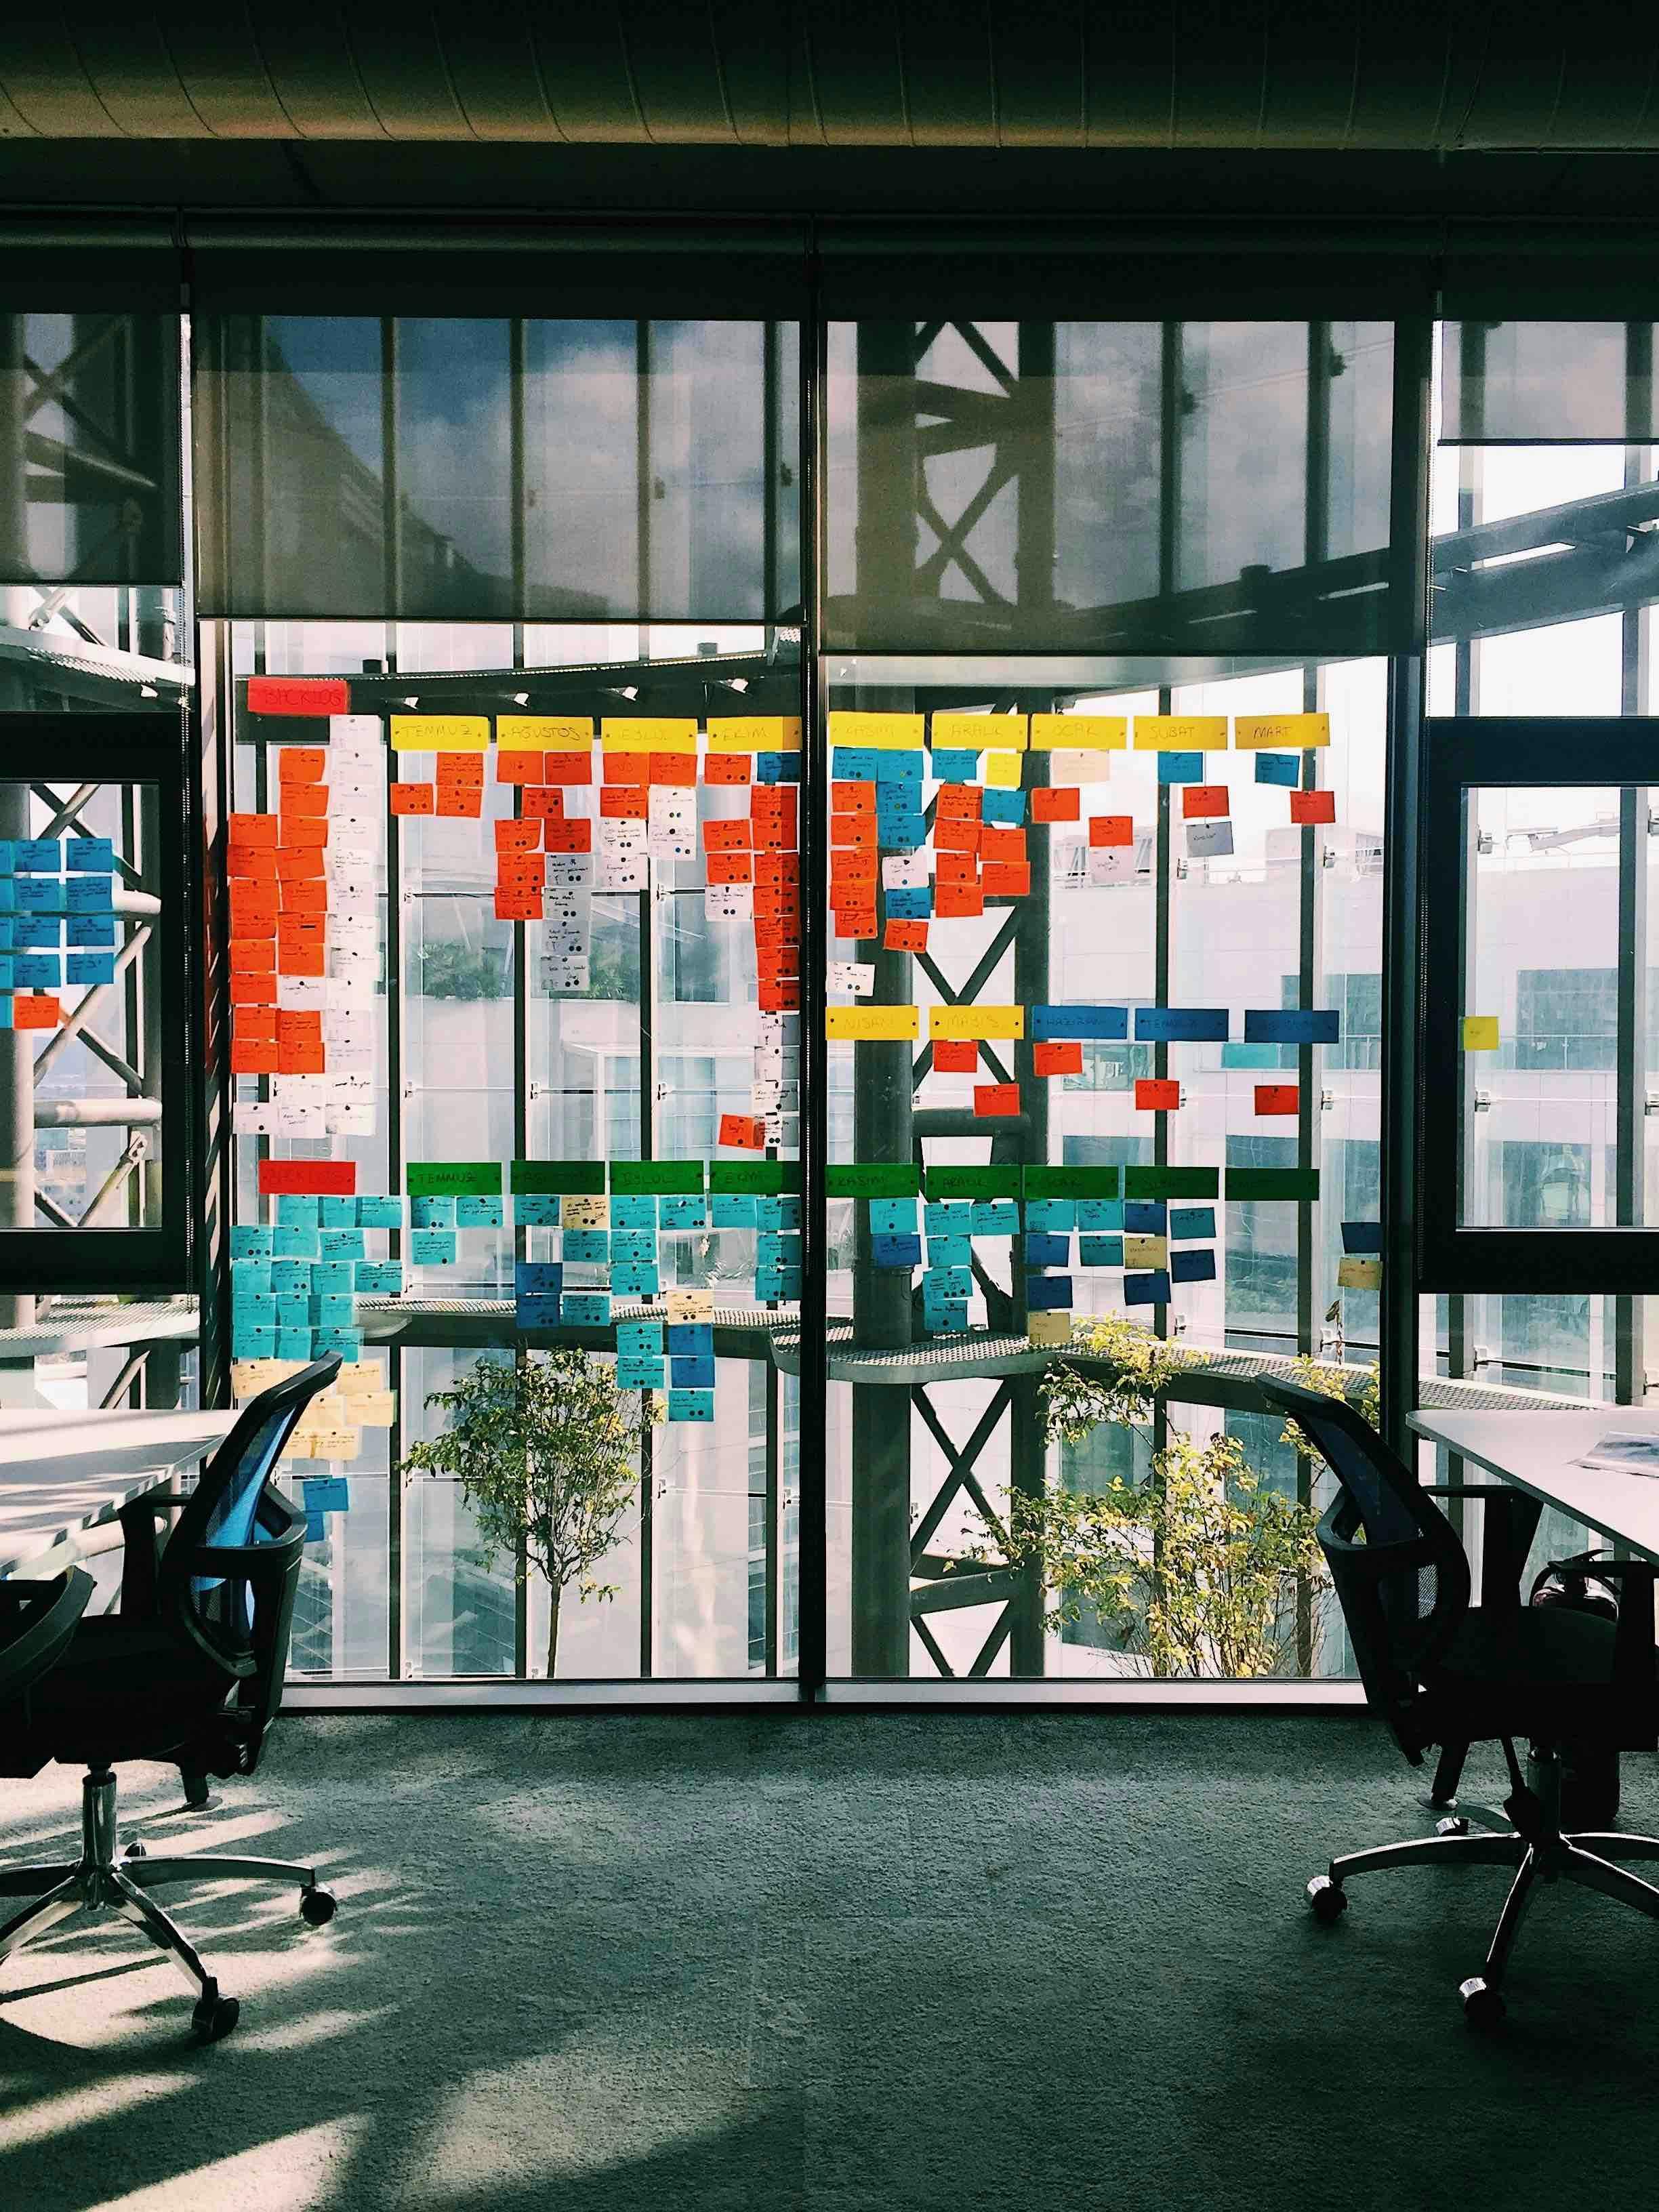 A glass wall with stickers used for story estimates